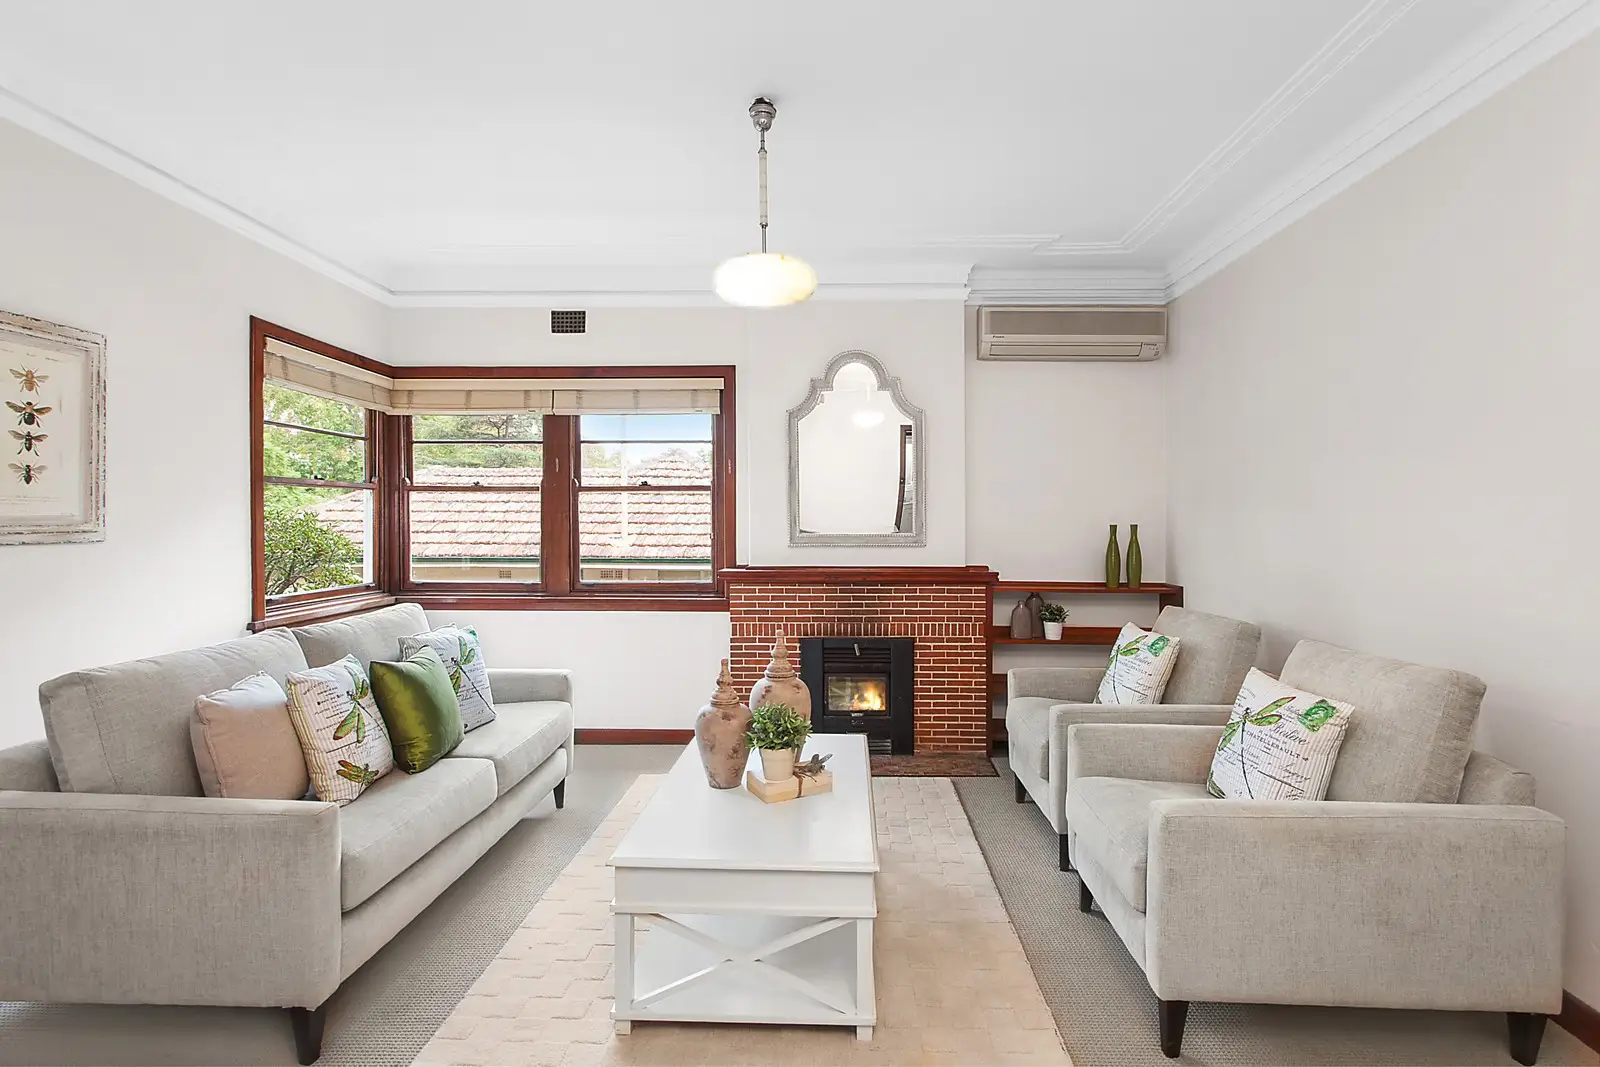 Photo #1: 33 Inverallan Avenue, West Pymble - Sold by Sydney Sotheby's International Realty